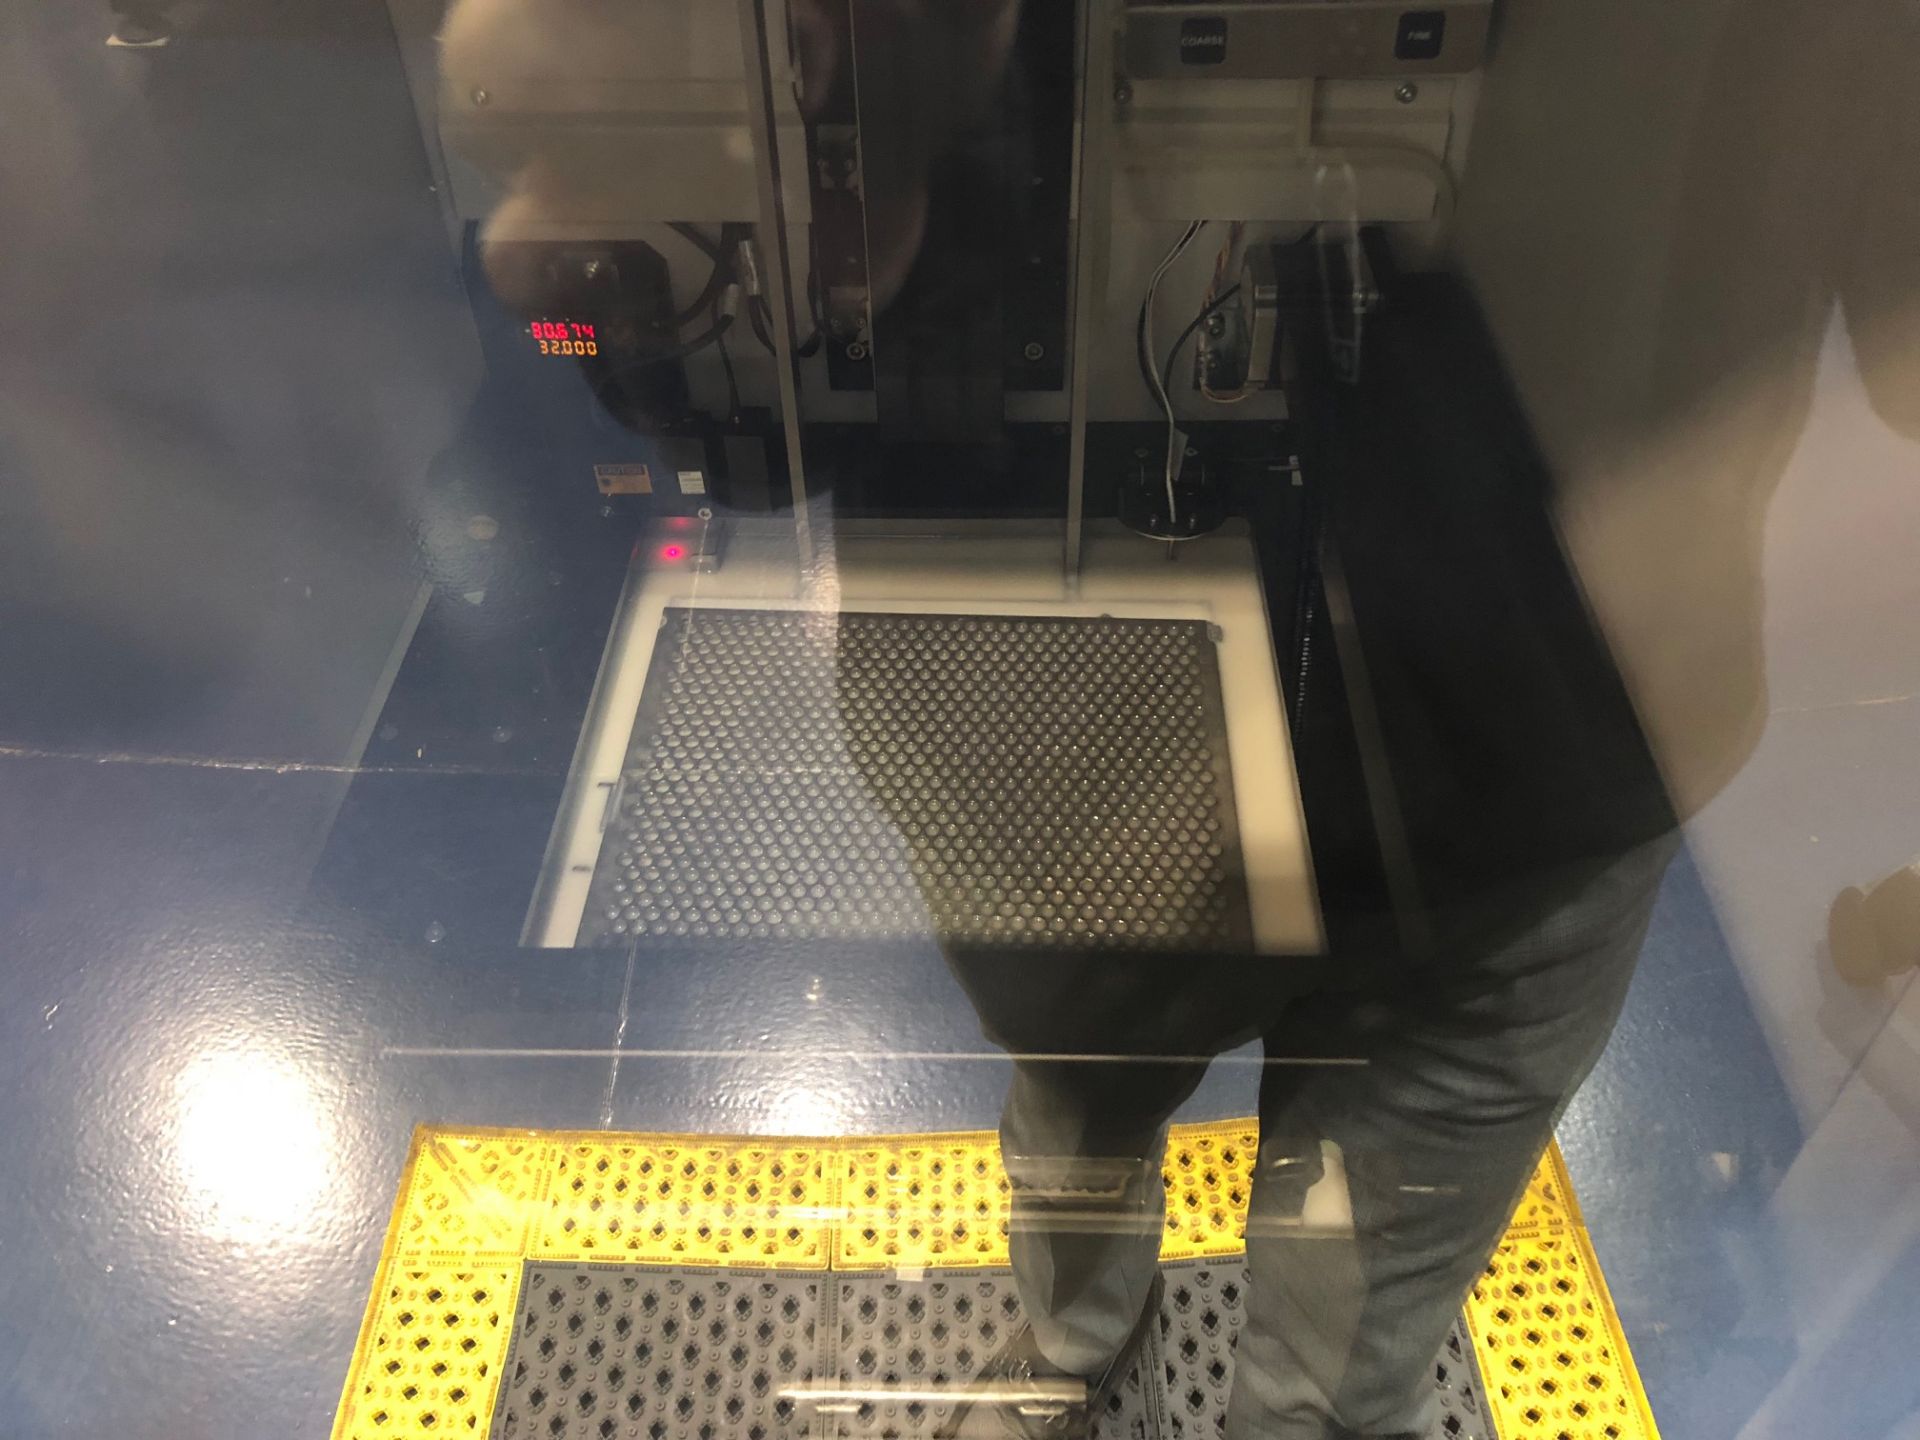 3D SYSTEMS ProJet 6000 HD Stereolithography 3D Printer, Used For Demo Only - Image 4 of 11